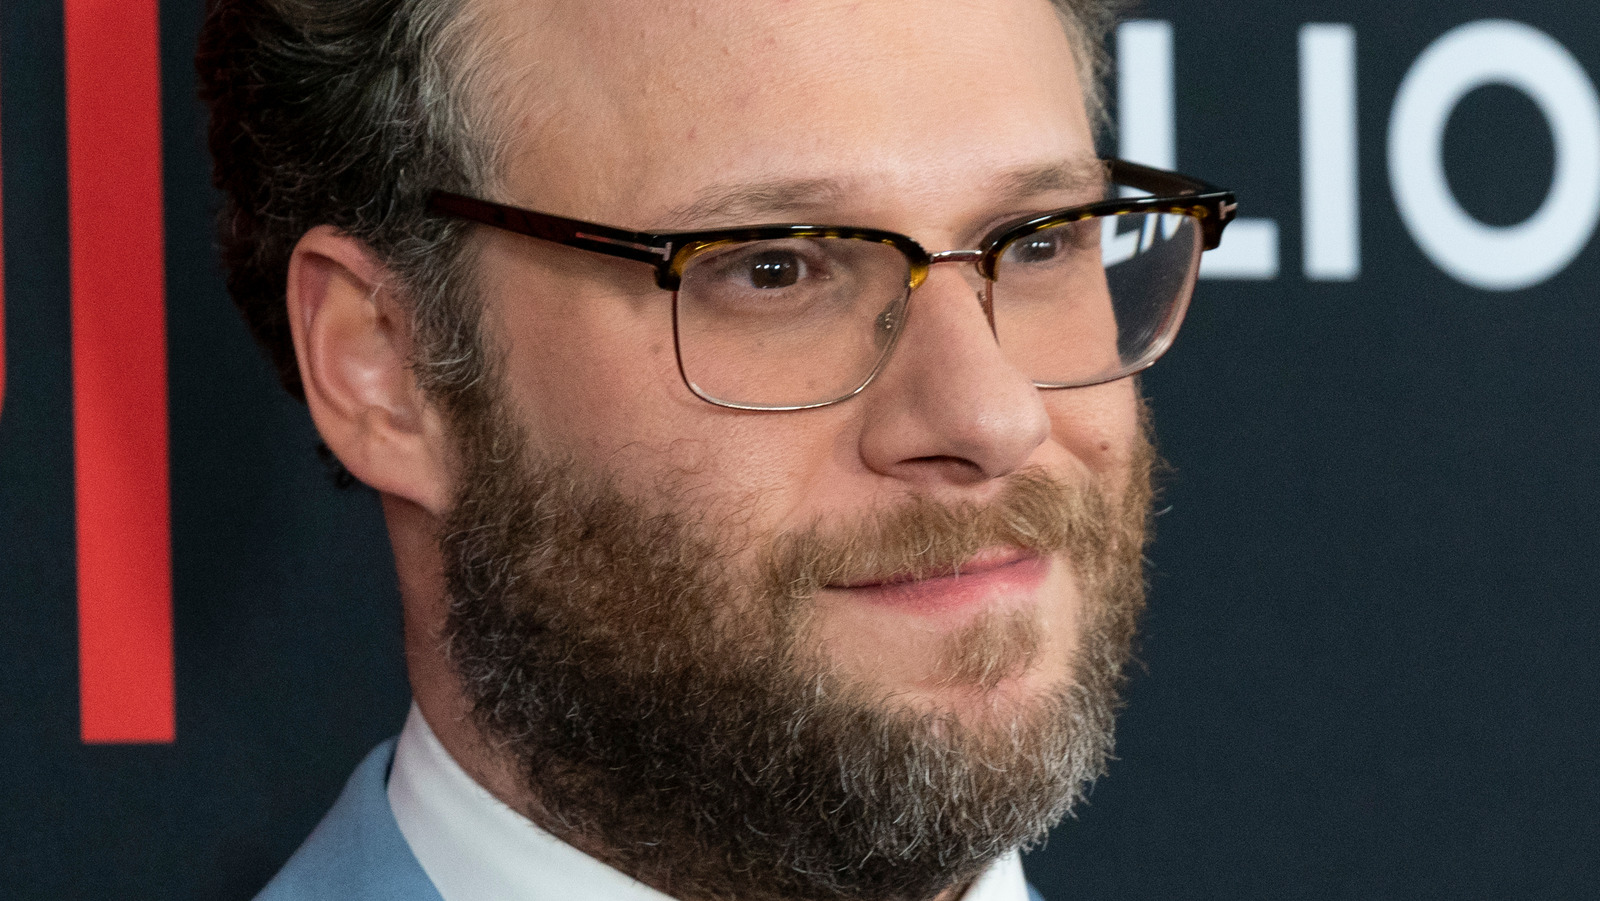 Seth Rogen's Slimmed Down Appearance At The 2021 Emmys Is Causing A Stir